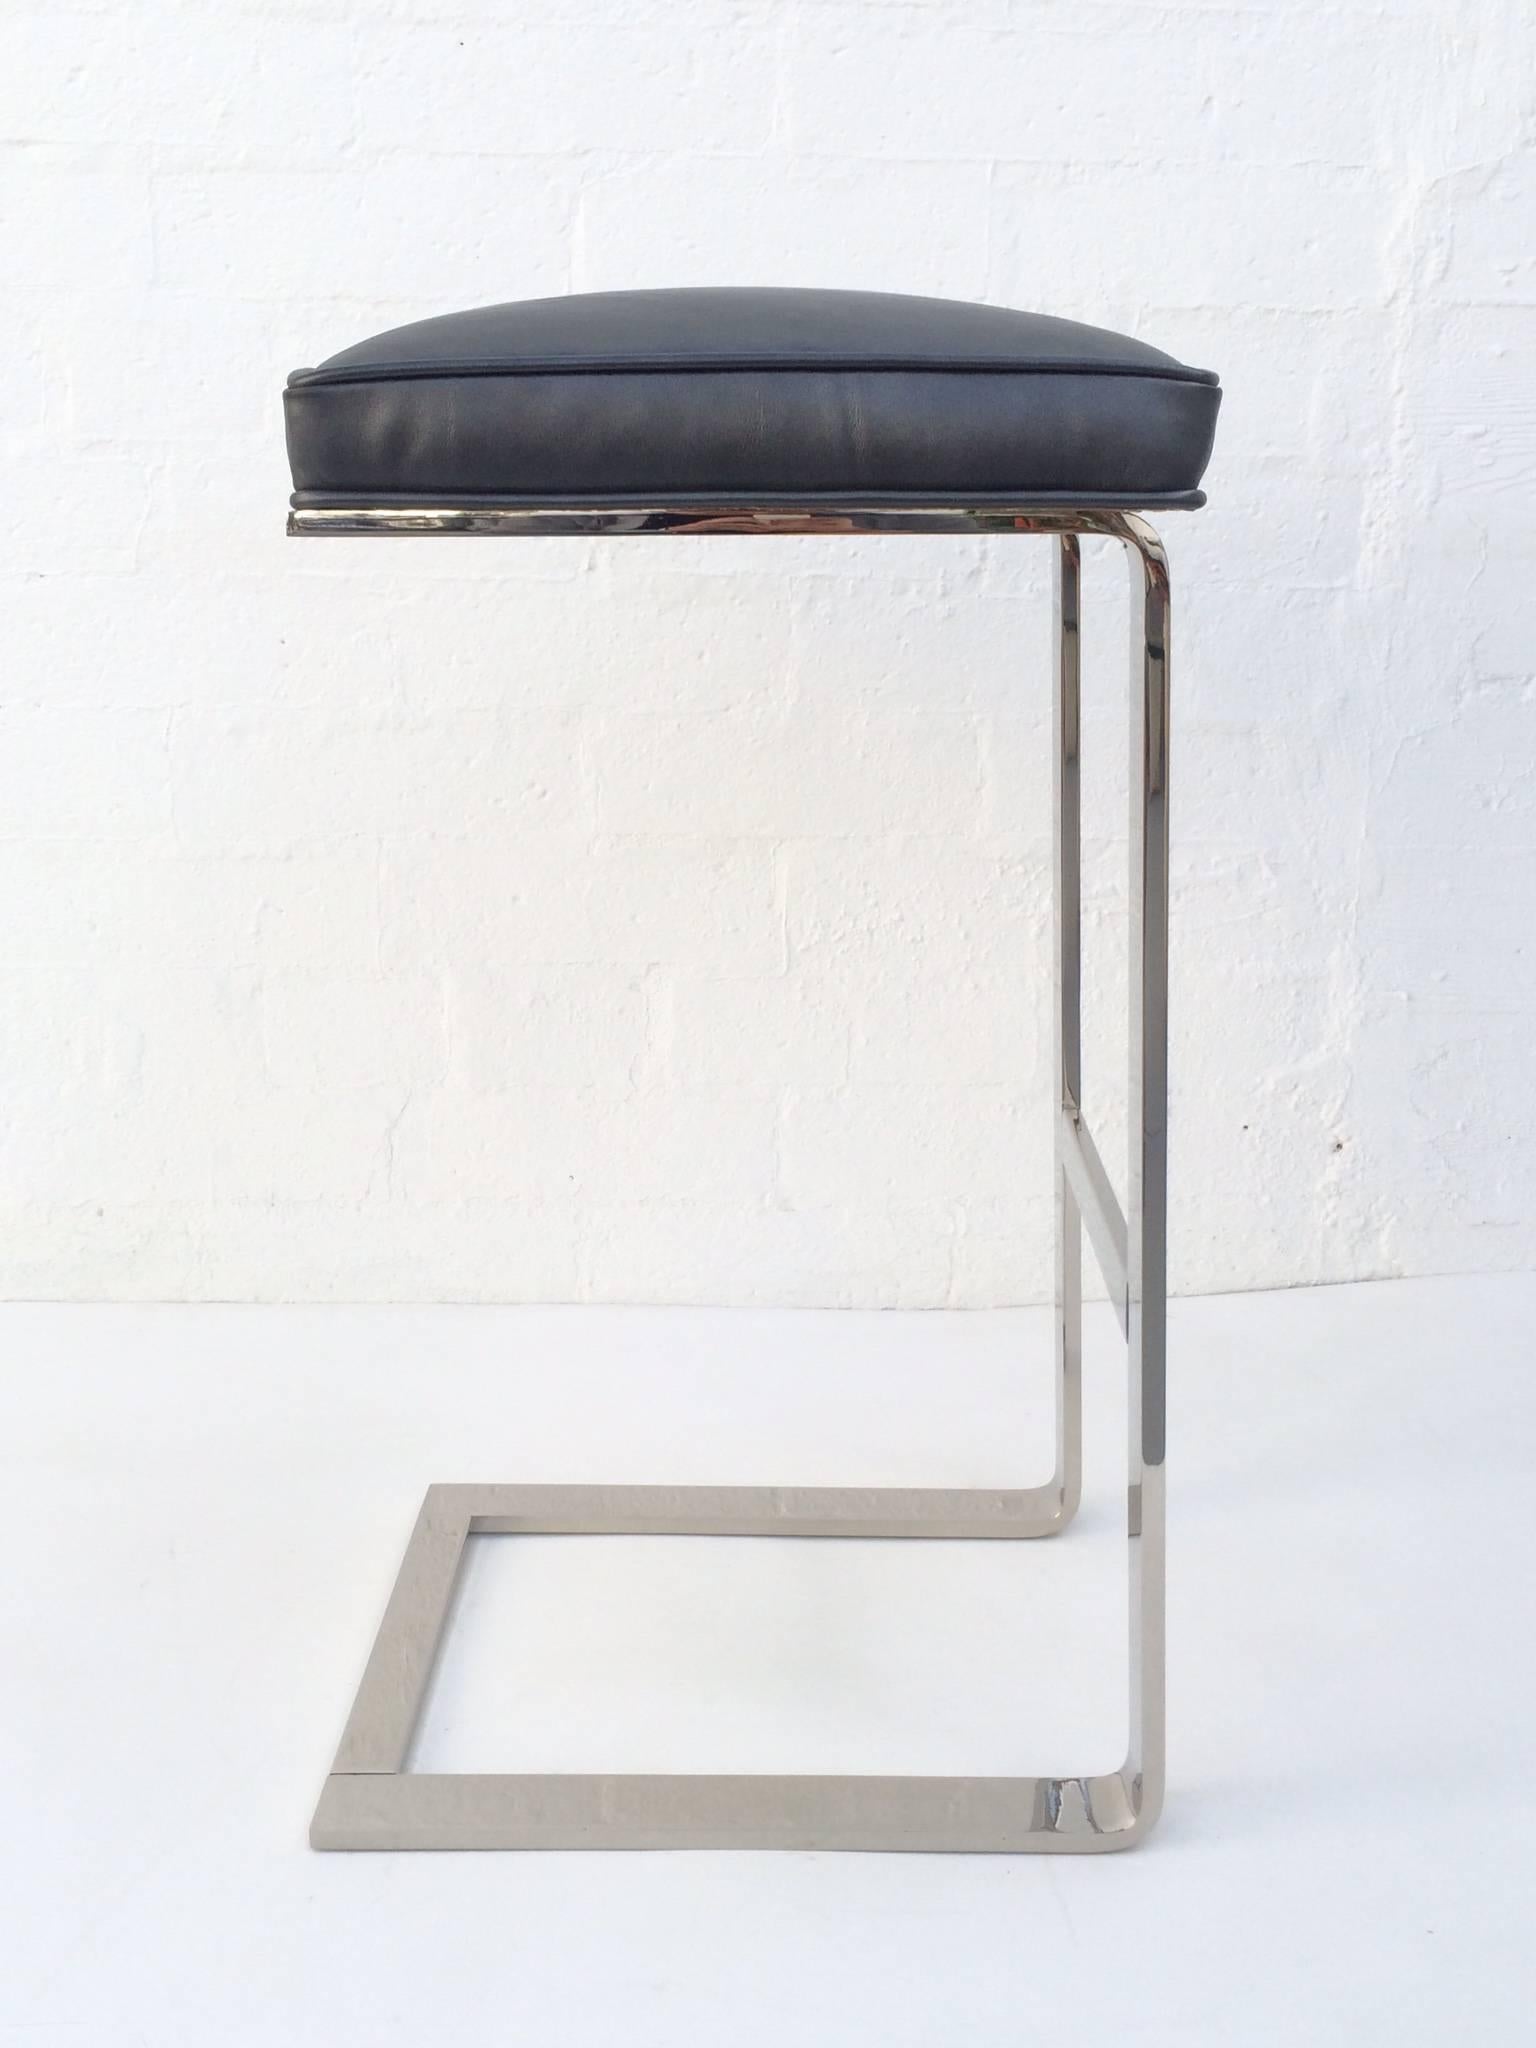 Plated Pair of Nickel and Leather Barstools by Milo Baughman